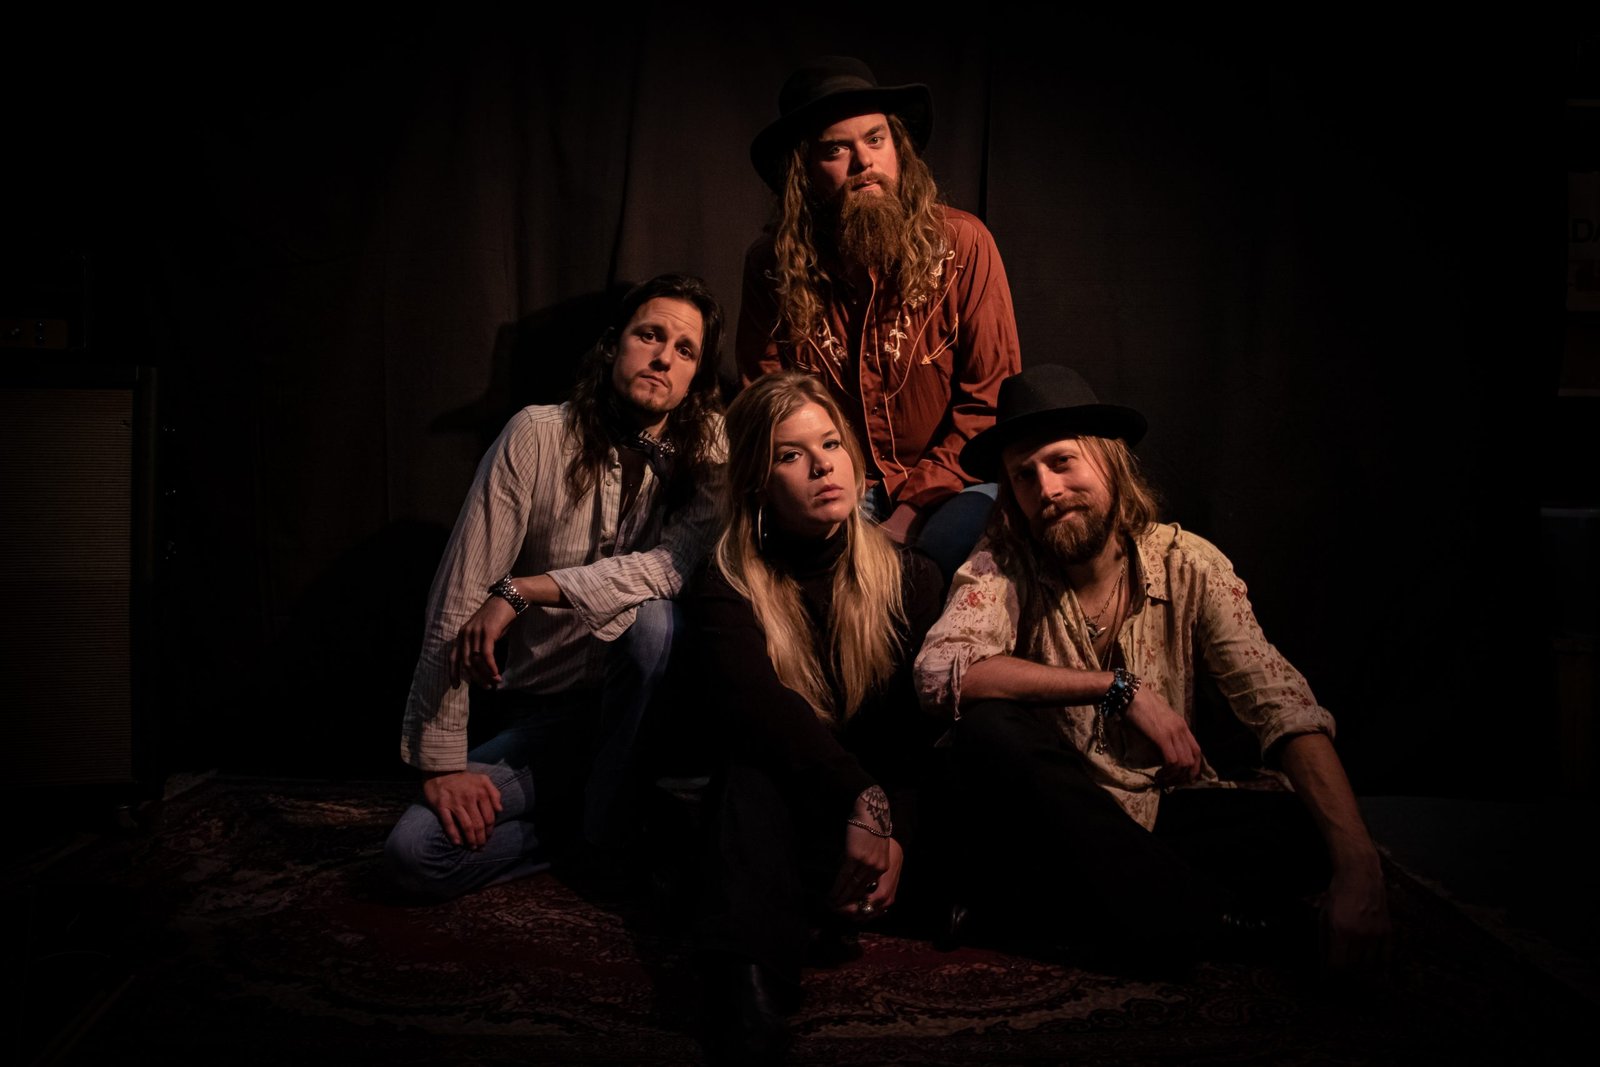 Heavy Feather – “Mountain of Sugar”